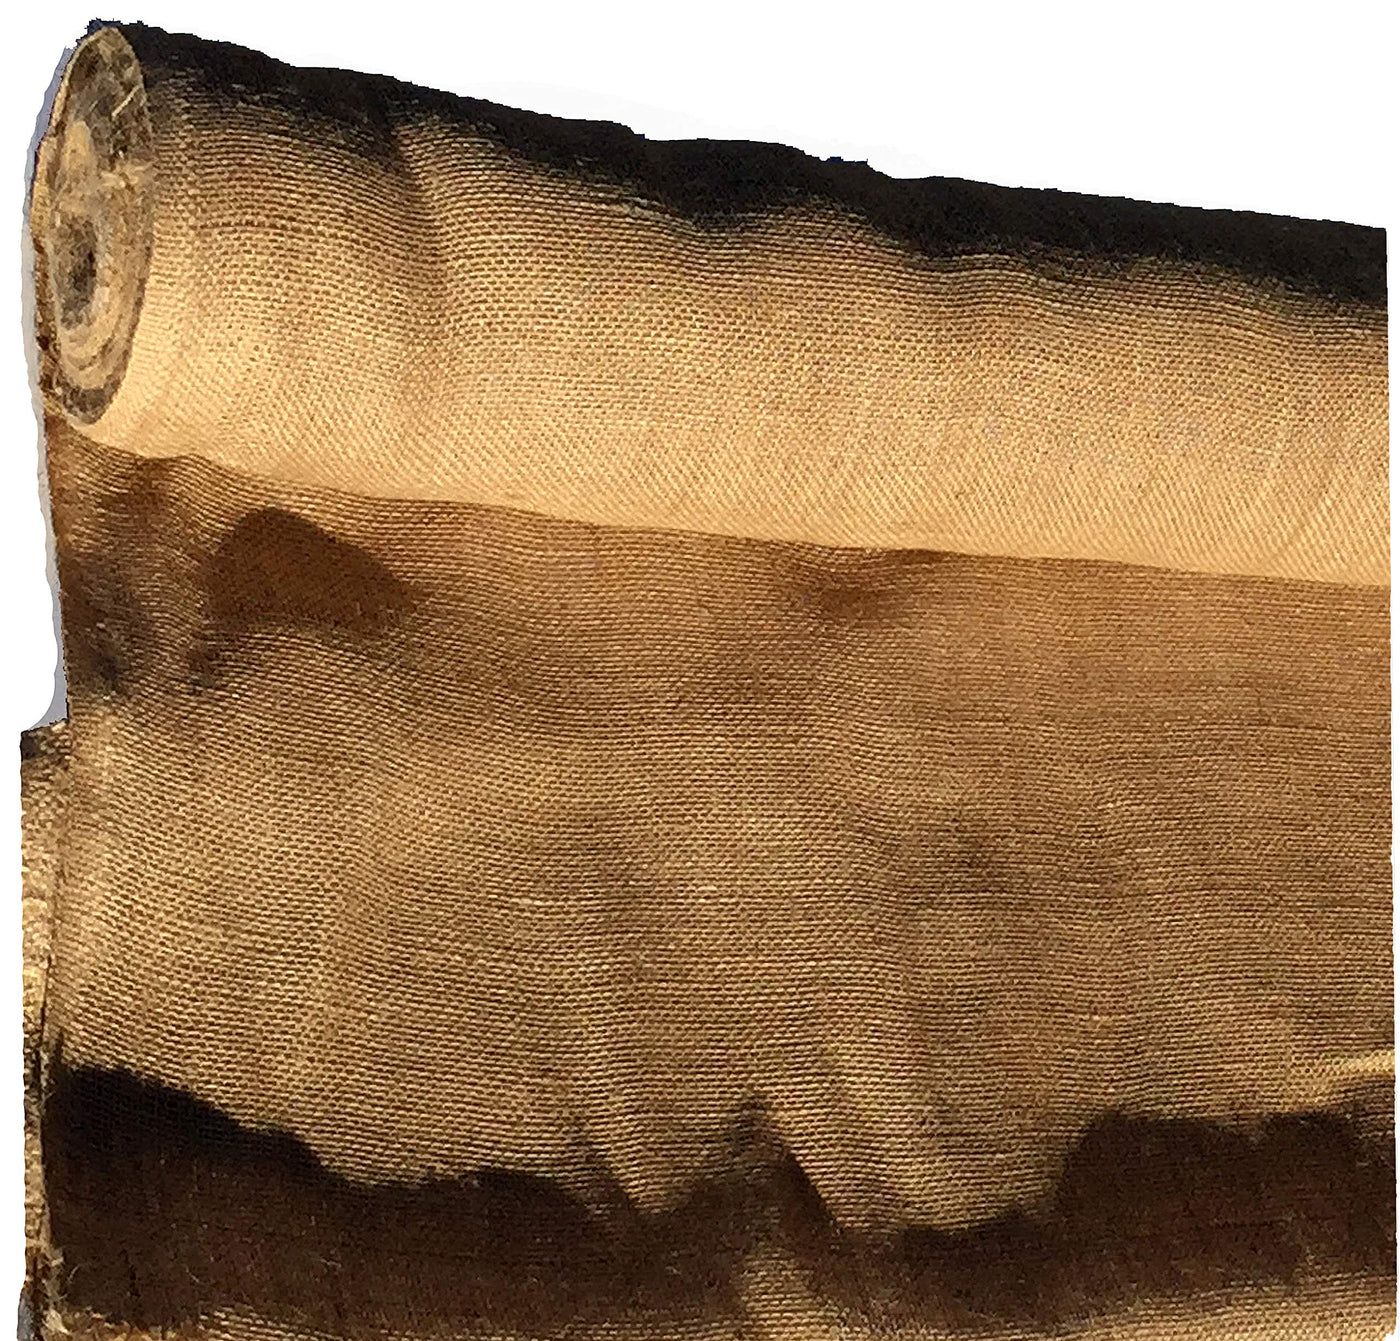 AAYU Brand Premium Burlap Fabric Roll 36 inch x 5 Yards (3 ft x 15 ft) | Eco-Friendly Natural Jute Product | Great for Banner, Garland, Landscaping or Table Decorations | Heavy (10 Ounce)